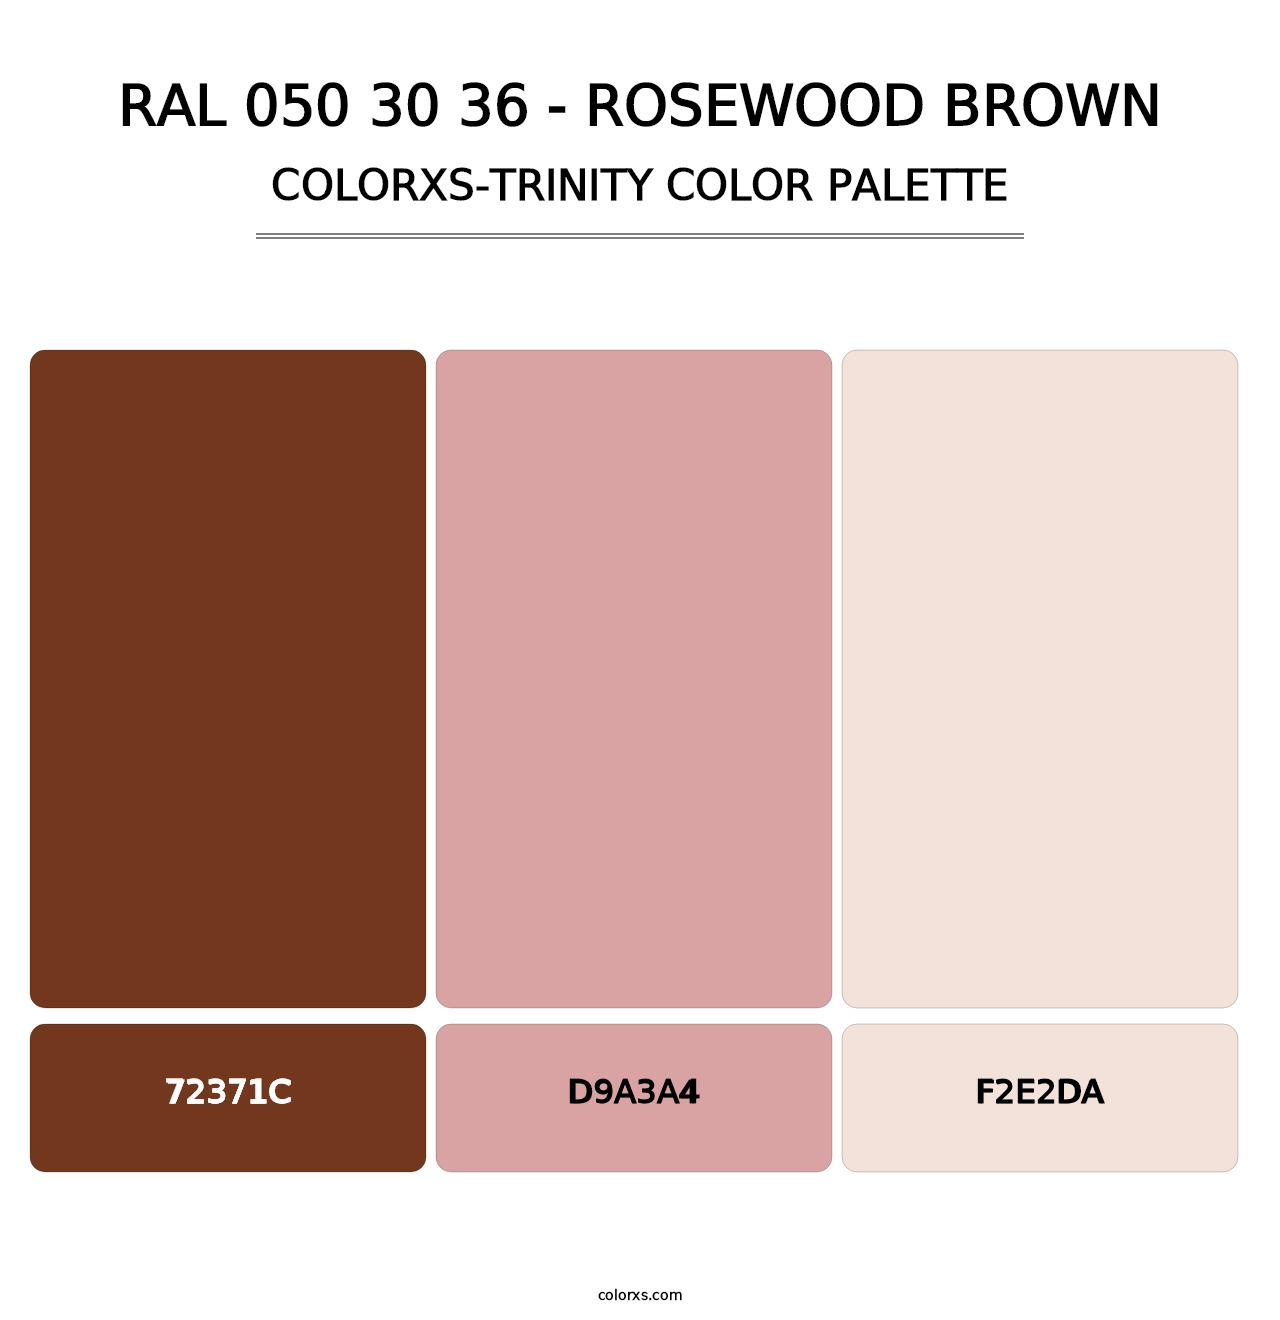 RAL 050 30 36 - Rosewood Brown - Colorxs Trinity Palette